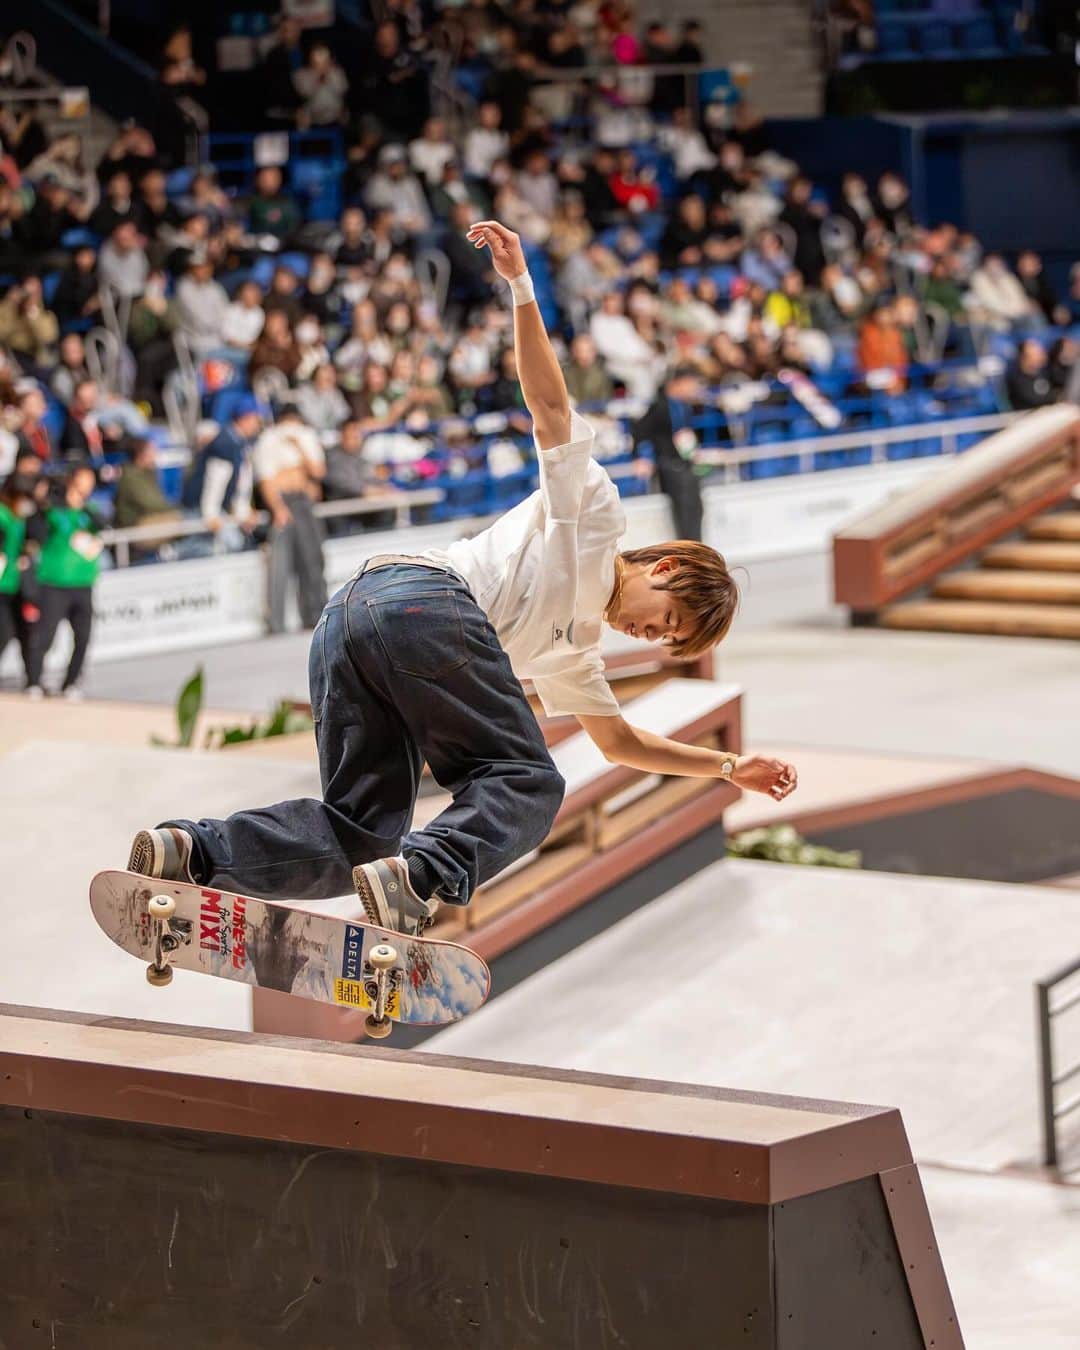 The Japan Timesのインスタグラム：「Japan’s street skateboarding team showed they are a force to be reckoned with ahead of the 2024 Paris Olympics. At the Street World Championship 2023, held in Tokyo at Ariake Arena, the nation’s young skaters claimed nine of the 16 finalist spots and five out of six medals.  Progressing towards his second Olympics, Sora Shirai won the men’s title, while Yumeka Oda, aiming for her Olympic debut, secured the women’s championship.   Japan’s podium dominance included Kairi Netsuke and Yuto Horigome, with 13-year-old Ginwoo Onodera ranking second nationally. Despite the fact that he is still recovering from a hip injury, Olympic champion Horigome advanced in global rankings.  Momiji Nishiya, another Tokyo Olympic gold medalist, earned world championship bronze.  Other Japanese skaters, such as Liz Akama, Funa Nakayama, Coco Yoshizawa and Miyu Ito, also proved that the country is hotbed of skateboarding talent.  Read more via the link in our bio.   📸: @bobbyschaub_photography for The Japan Times  #WorldSkateboardingTour #WorldSkateSB #OlympicQualifiers #RoadToParis2024 #スケボー #Skateboarding #WorldSkate #japantimes」